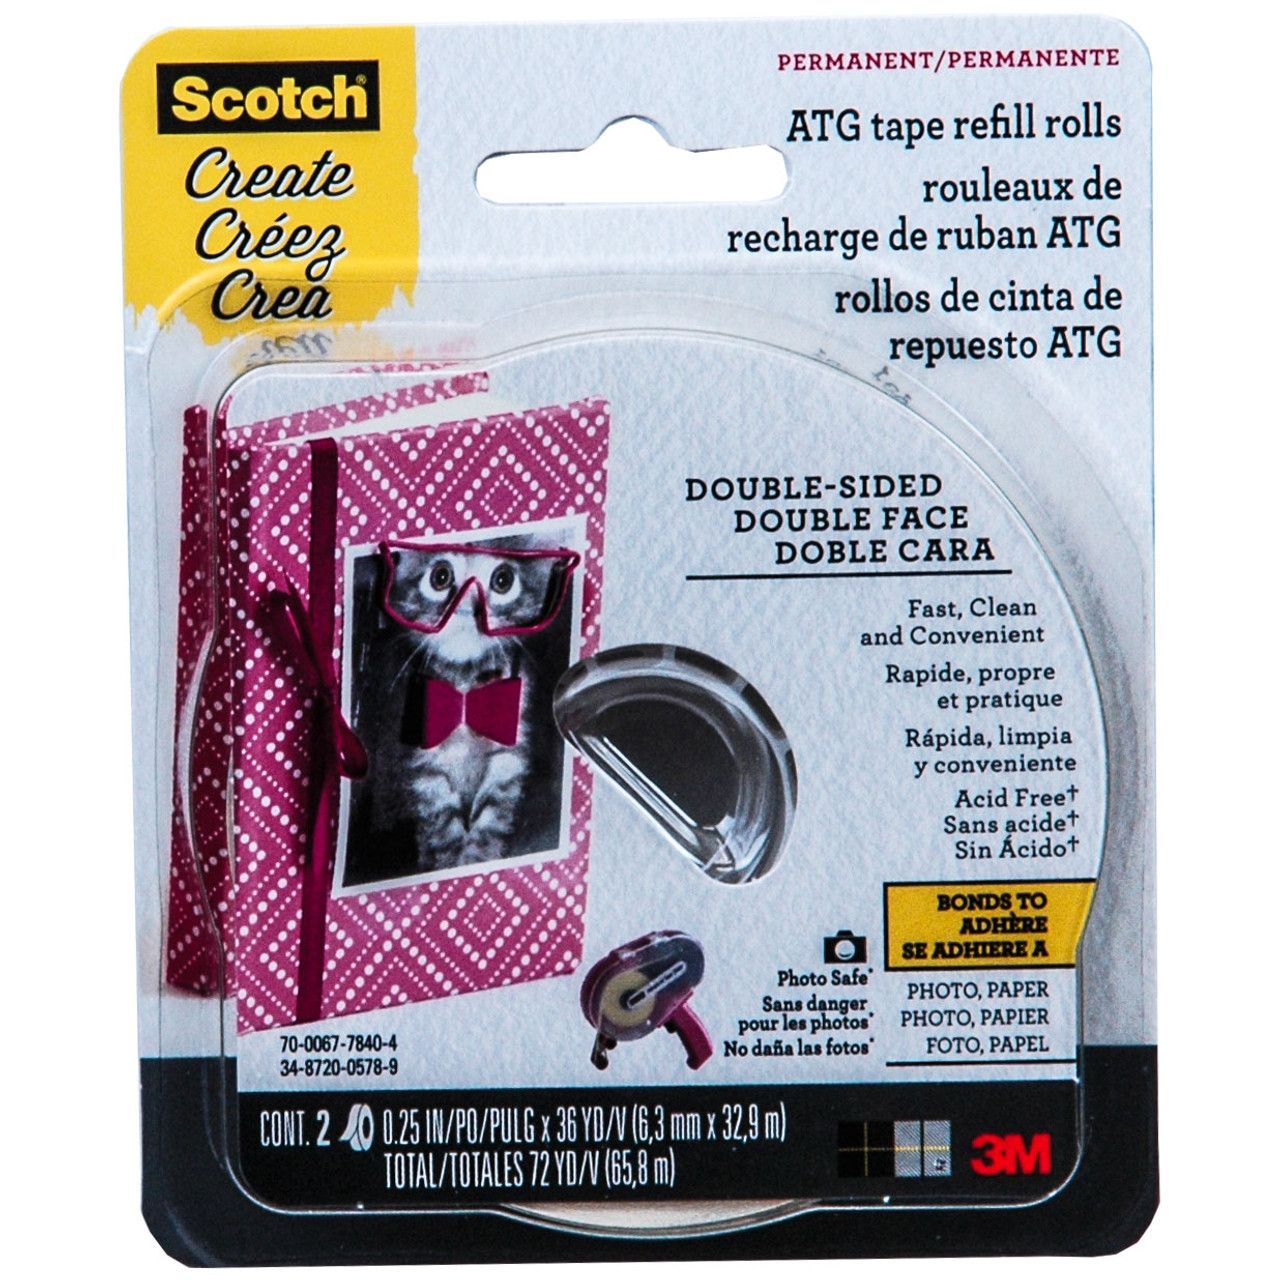 Scotch 3M Refill Rolls of Double-Sided Adhesive Tape, 6.3 mx 12 mm, Pack of  2